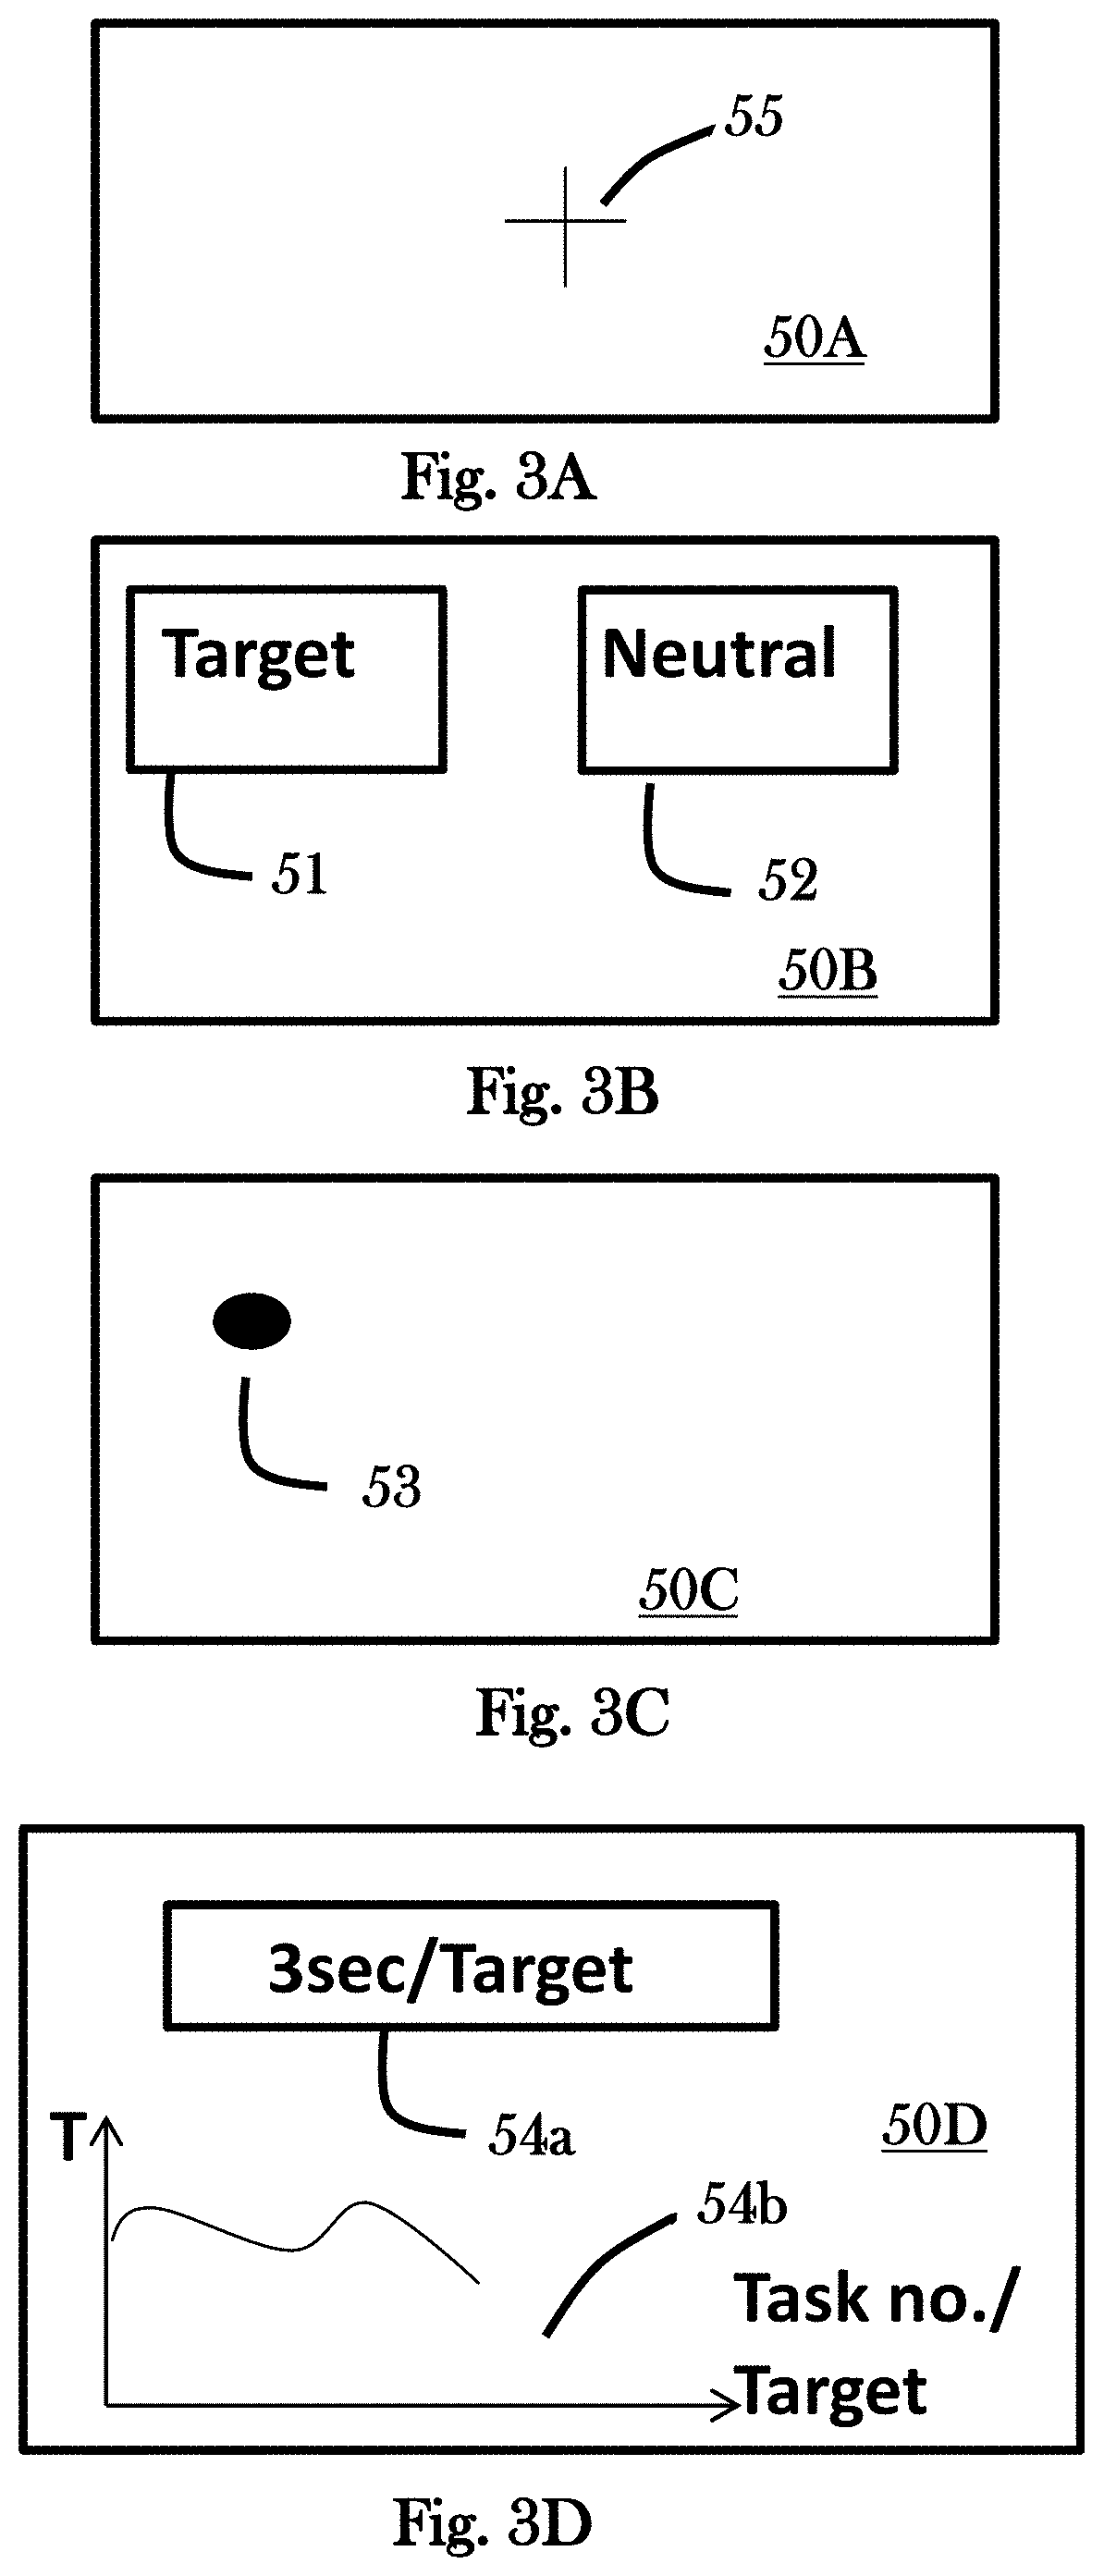 System and Method for Monitoring and Training Attention Allocation